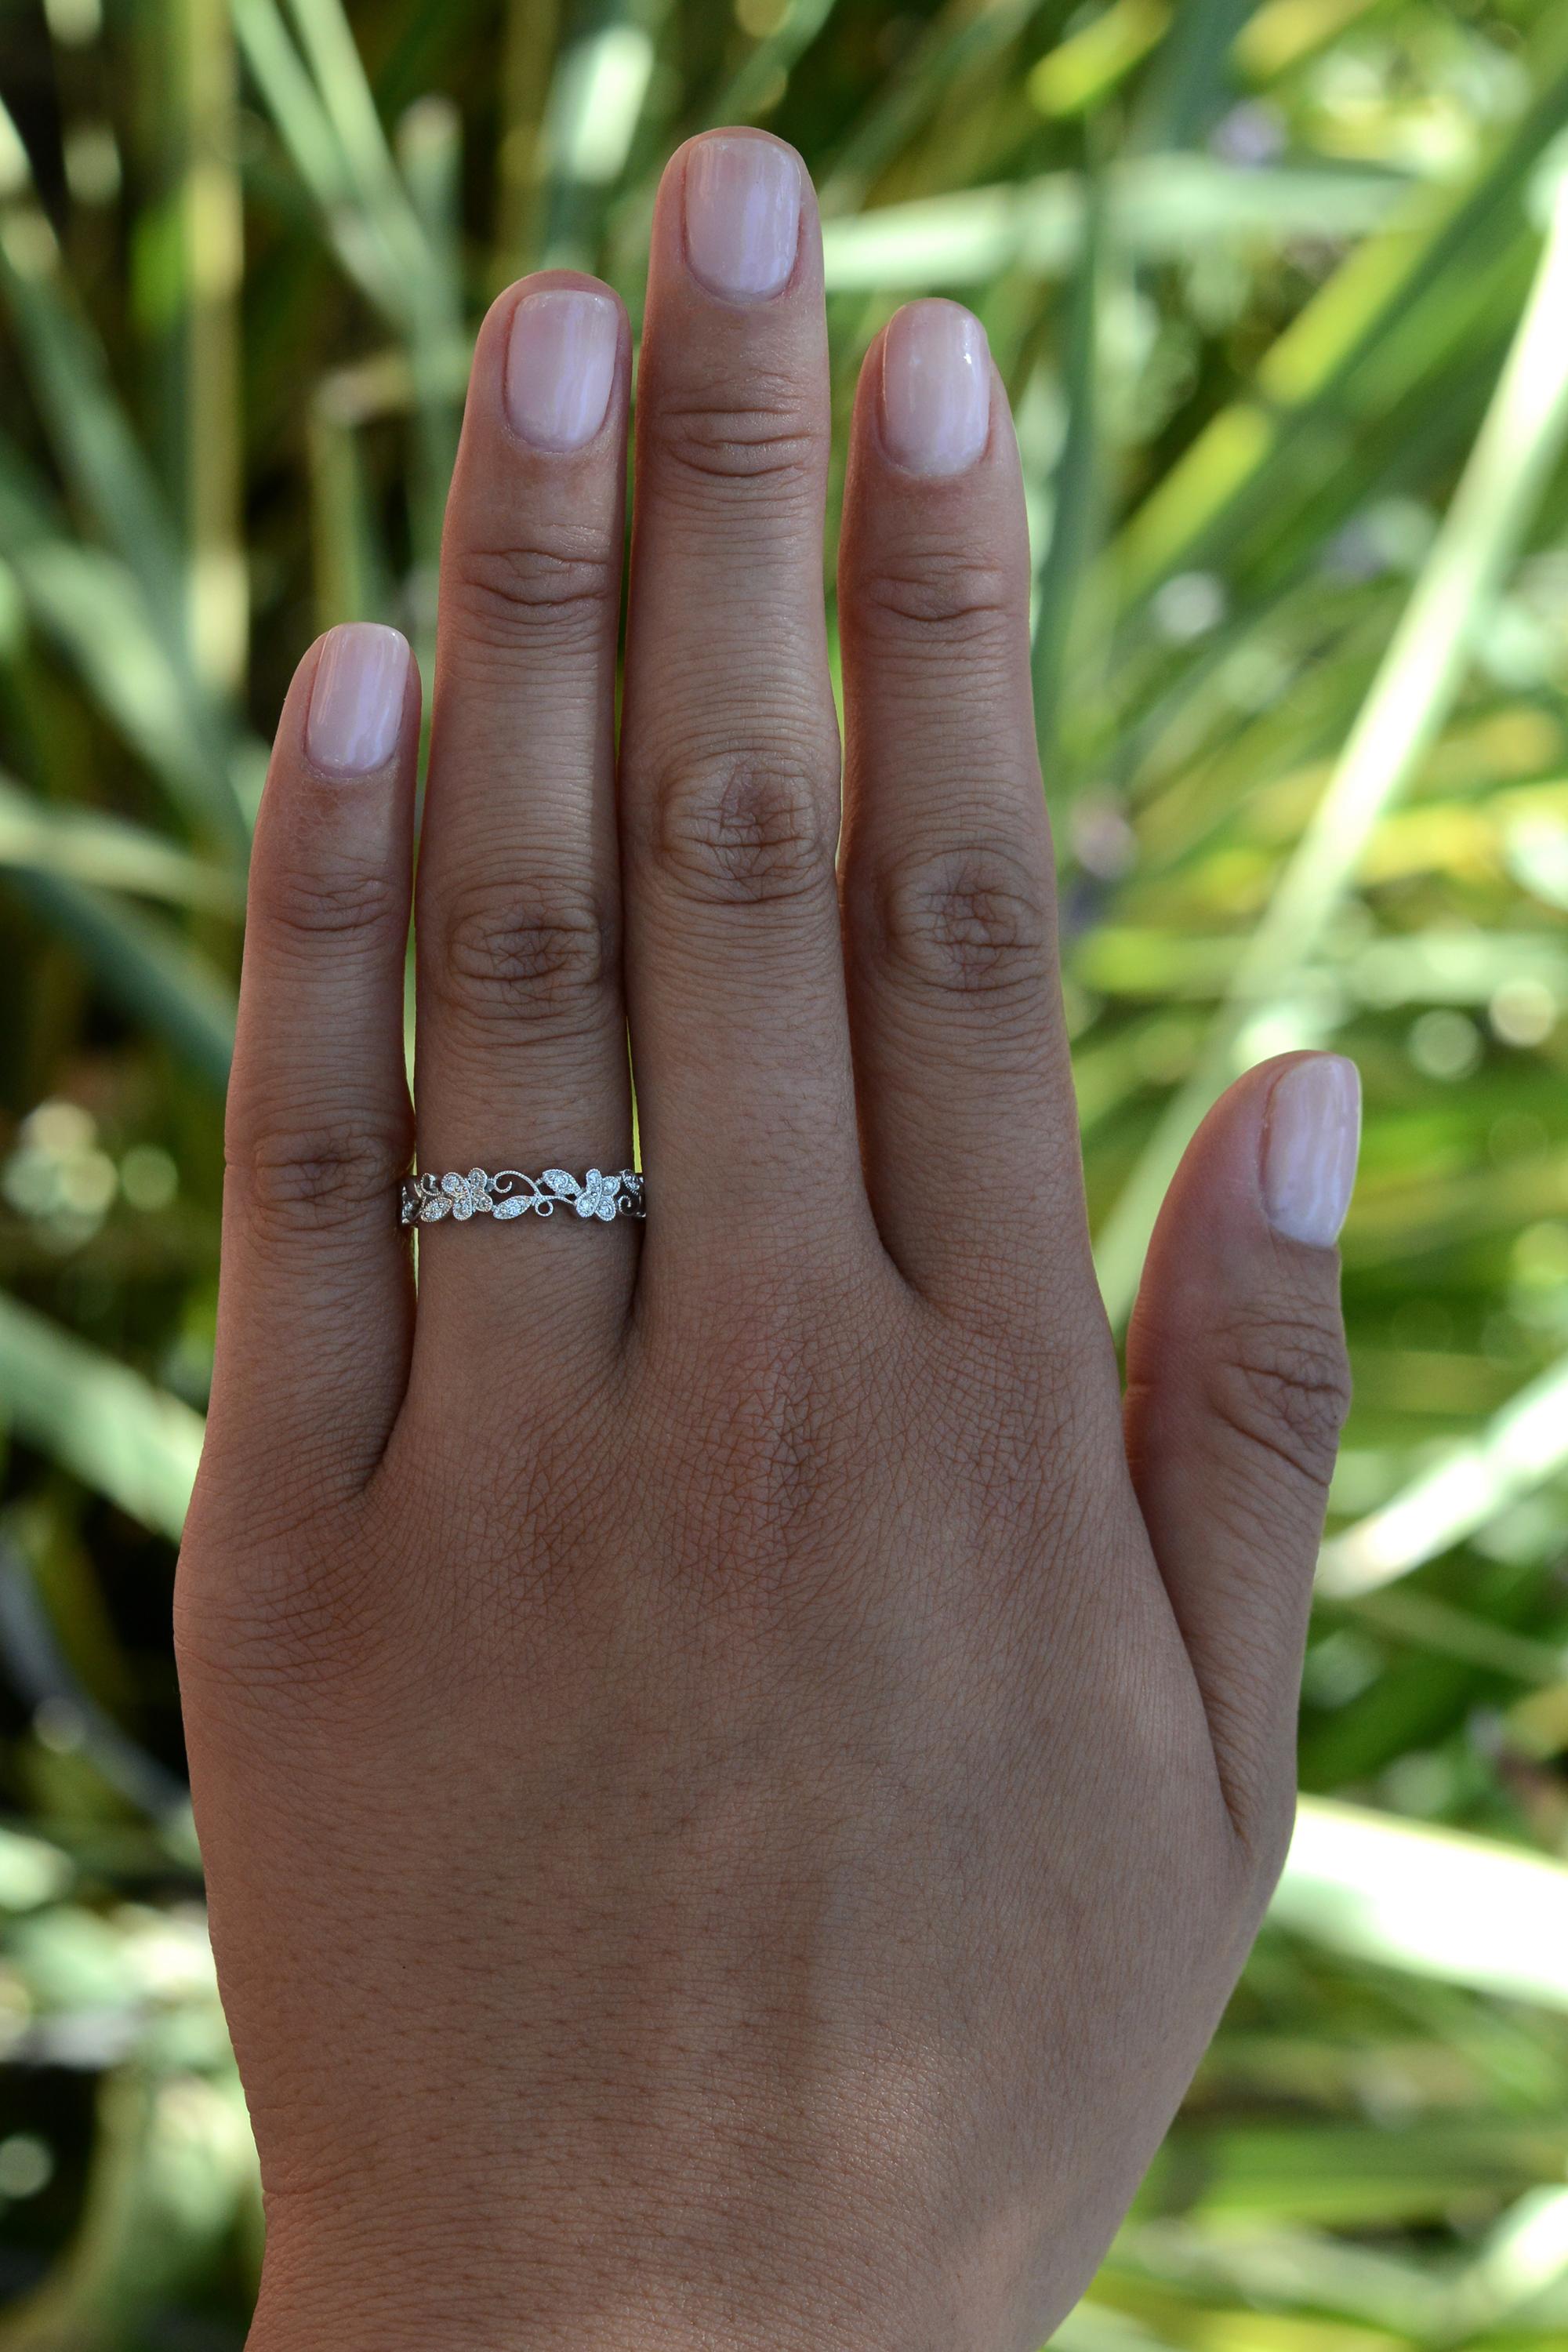 Look no further for your timeless diamond wedding band ring, sure to be a staple in your treasure chest with its slender chic fit and summery energy. This tasteful designer band is a lovely and light contemporary choice. With its intricate